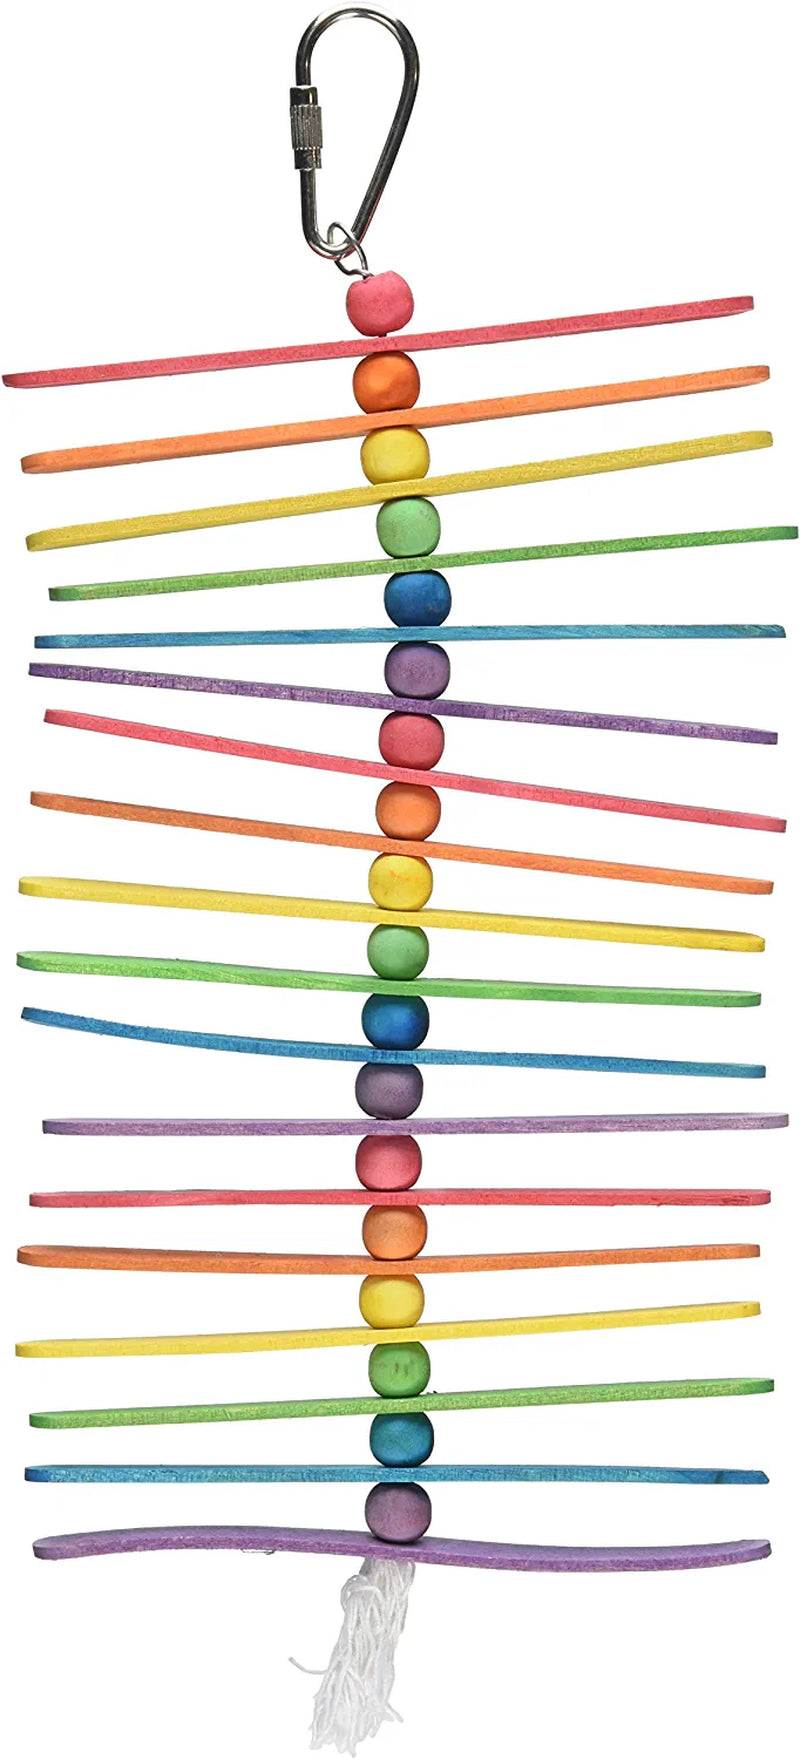 Featherland Paradise, Colorful Popsicle Sticks & Beads Pet Bird Toy, Bright Colors, Great for Chewing, Rainbow Helicoptor Popsicle Sticks & Beads Animals & Pet Supplies > Pet Supplies > Bird Supplies > Bird Toys Featherland Paradise   